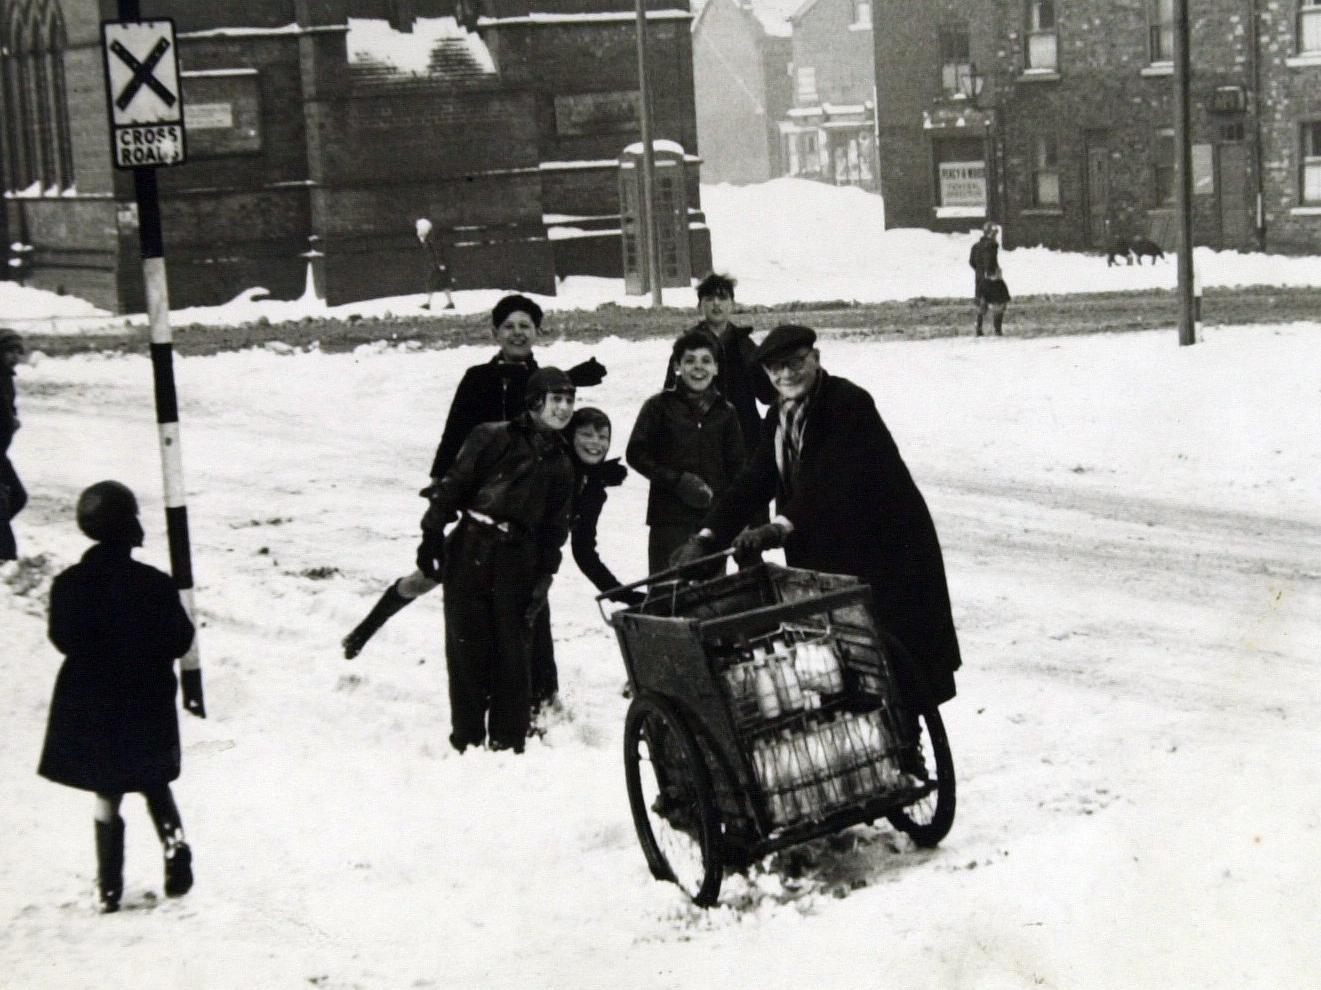 George Mitchell and his milk 'float' in winter of 1963 near Balm Road, Hunslet.